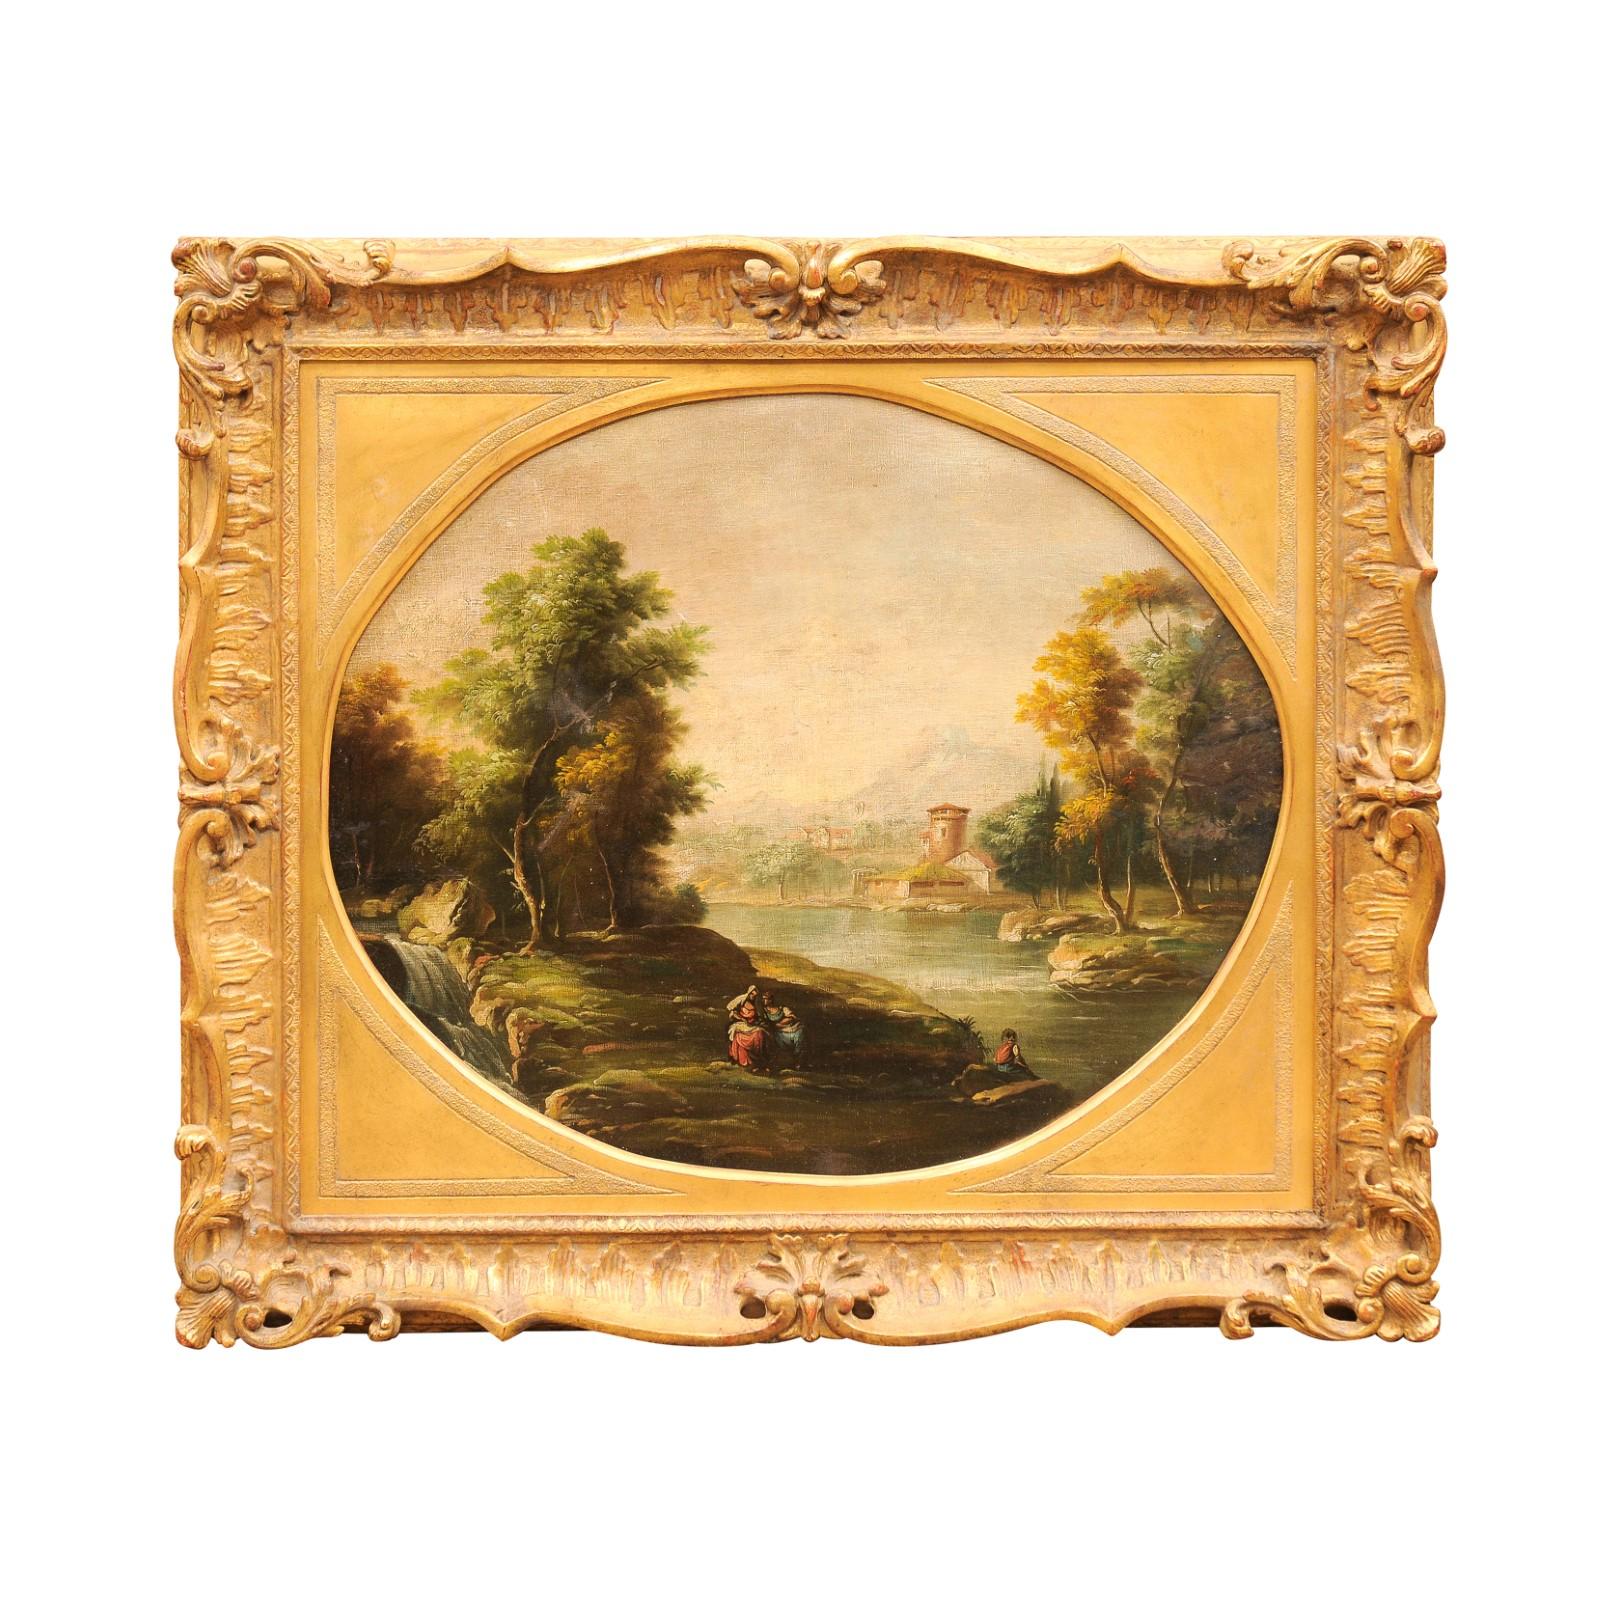 Large 19th Century English Oil on Canvas Landscape Painting in Gilt Frame
